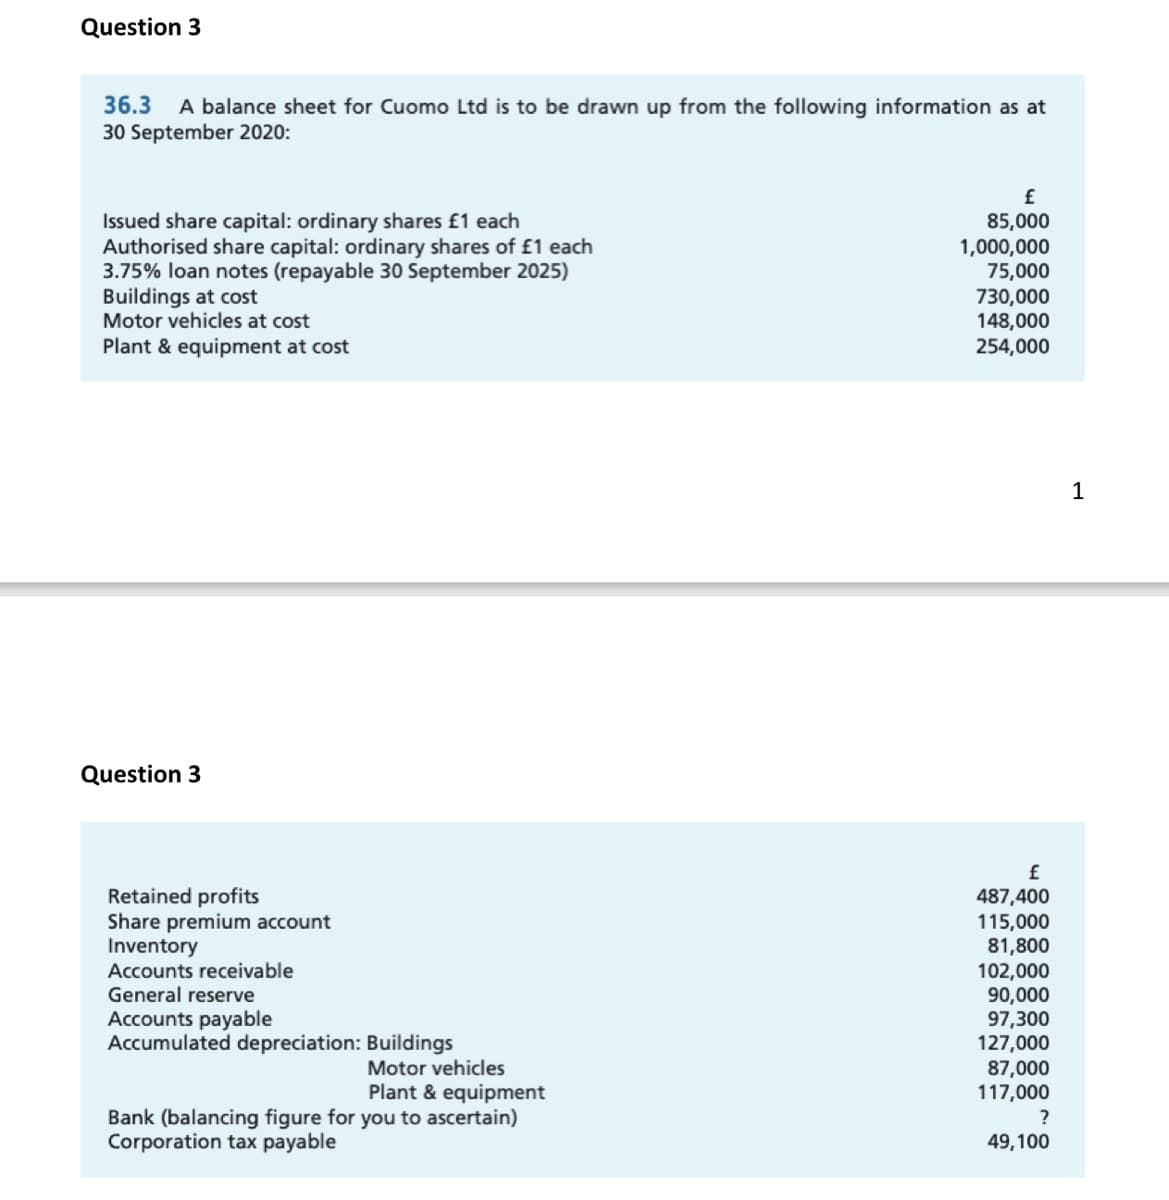 Question 3
36.3
A balance sheet for Cuomo Ltd is to be drawn up from the following information as at
30 September 2020:
Issued share capital: ordinary shares £1 each
Authorised share capital: ordinary shares of £1 each
3.75% loan notes (repayable 30 September 2025)
Buildings at cost
Motor vehicles at cost
85,000
1,000,000
75,000
730,000
148,000
254,000
Plant & equipment at cost
1
Question 3
Retained profits
Share premium account
Inventory
Accounts receivable
General reserve
Accounts payable
Accumulated depreciation: Buildings
487,400
115,000
81,800
102,000
90,000
97,300
127,000
87,000
117,000
Motor vehicles
Plant & equipment
Bank (balancing figure for you to ascertain)
Corporation tax payable
?
49,100
